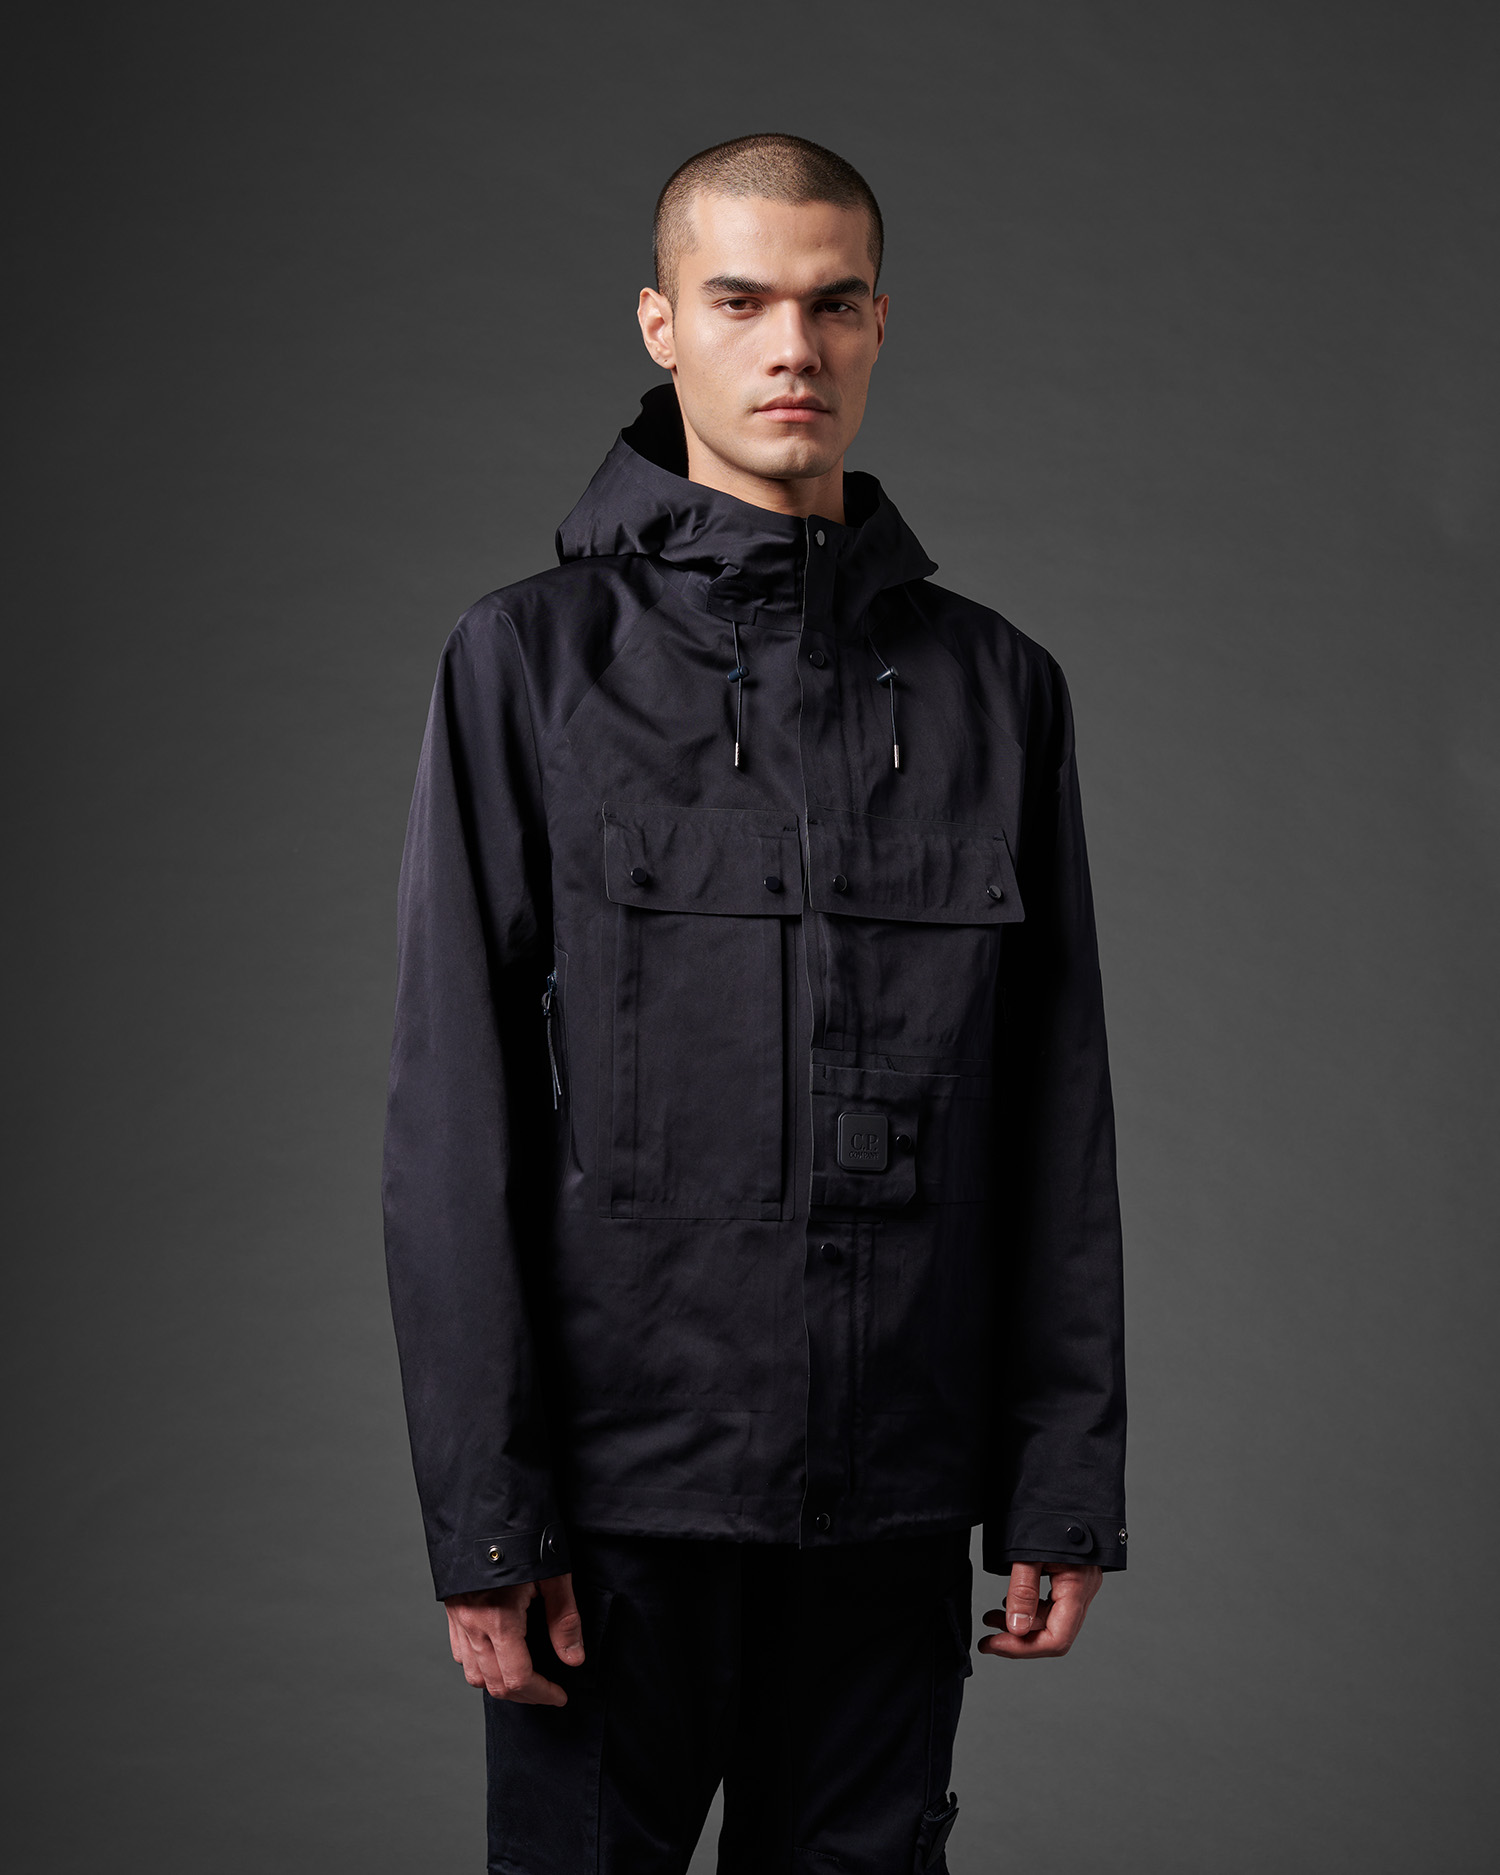 Metropolis Series A.A.C. Hooded Jacket | C.P. Company Online Store